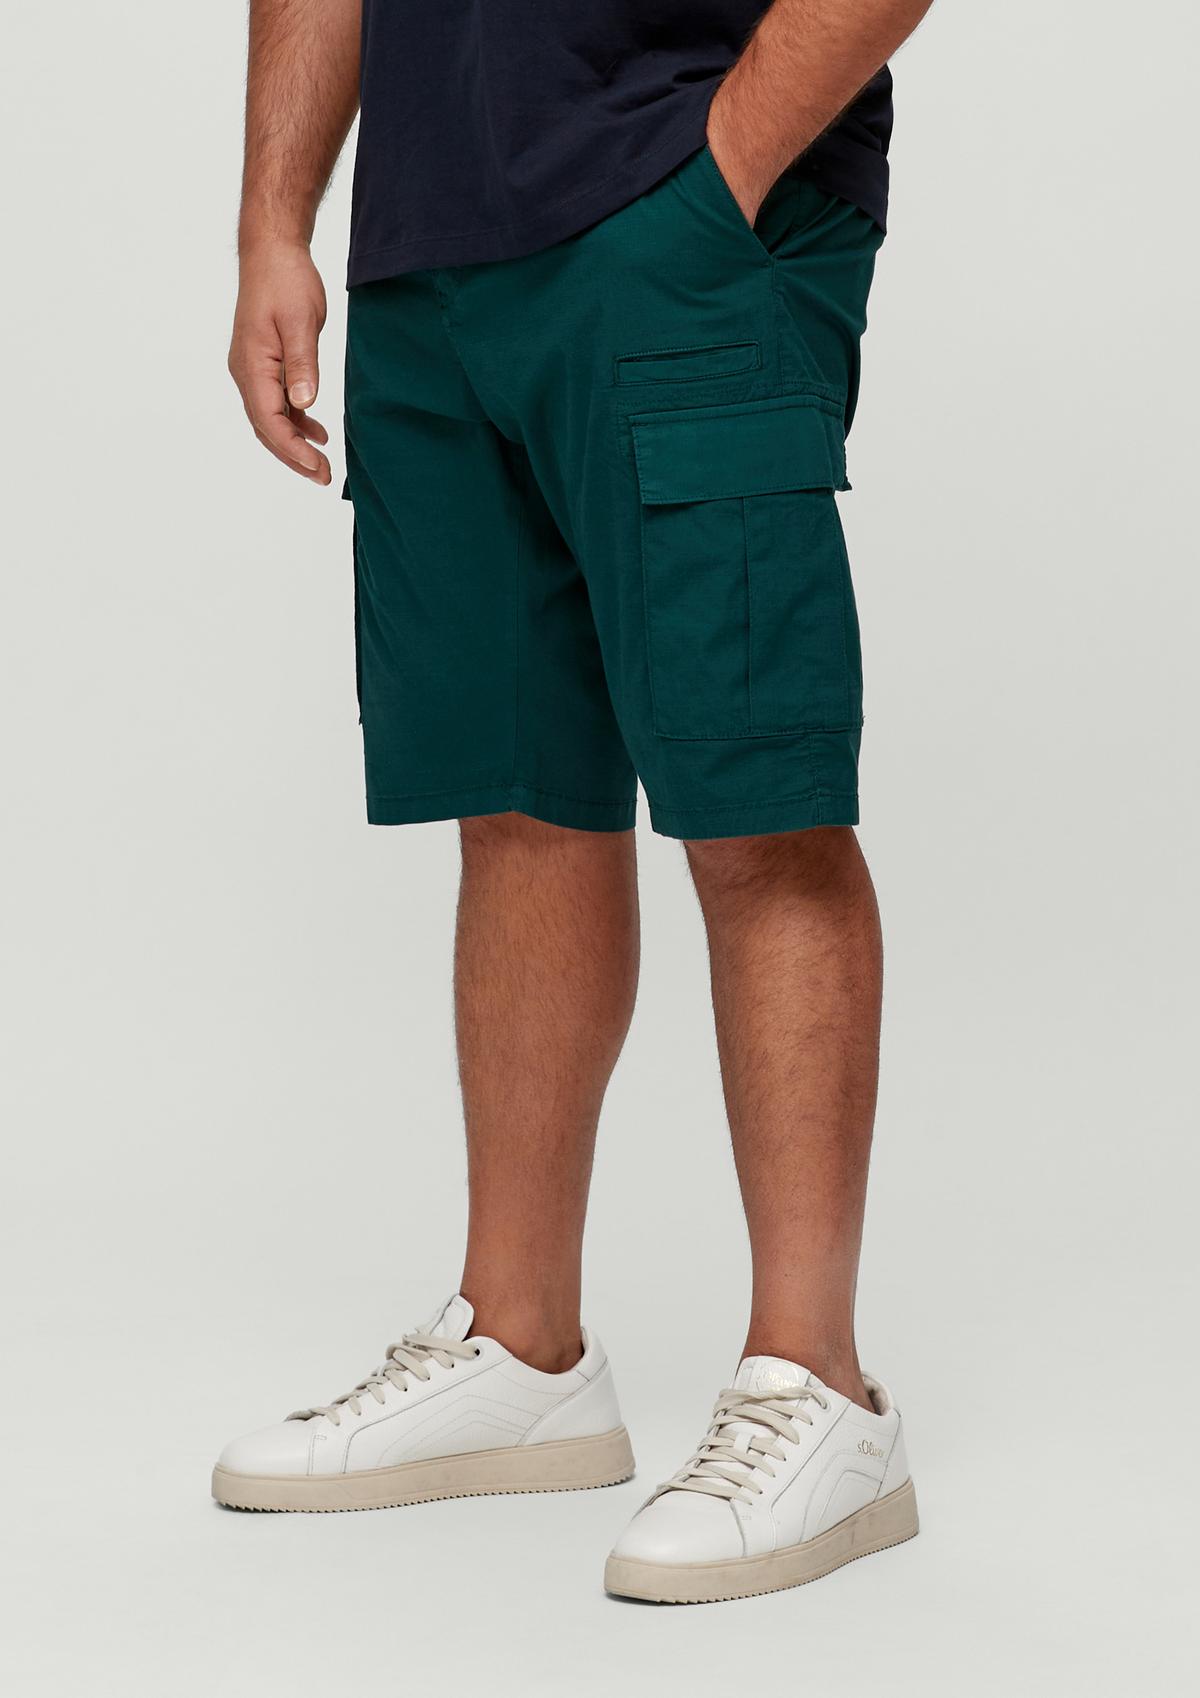 - with Relaxed Bermudas olive fit: pockets cargo